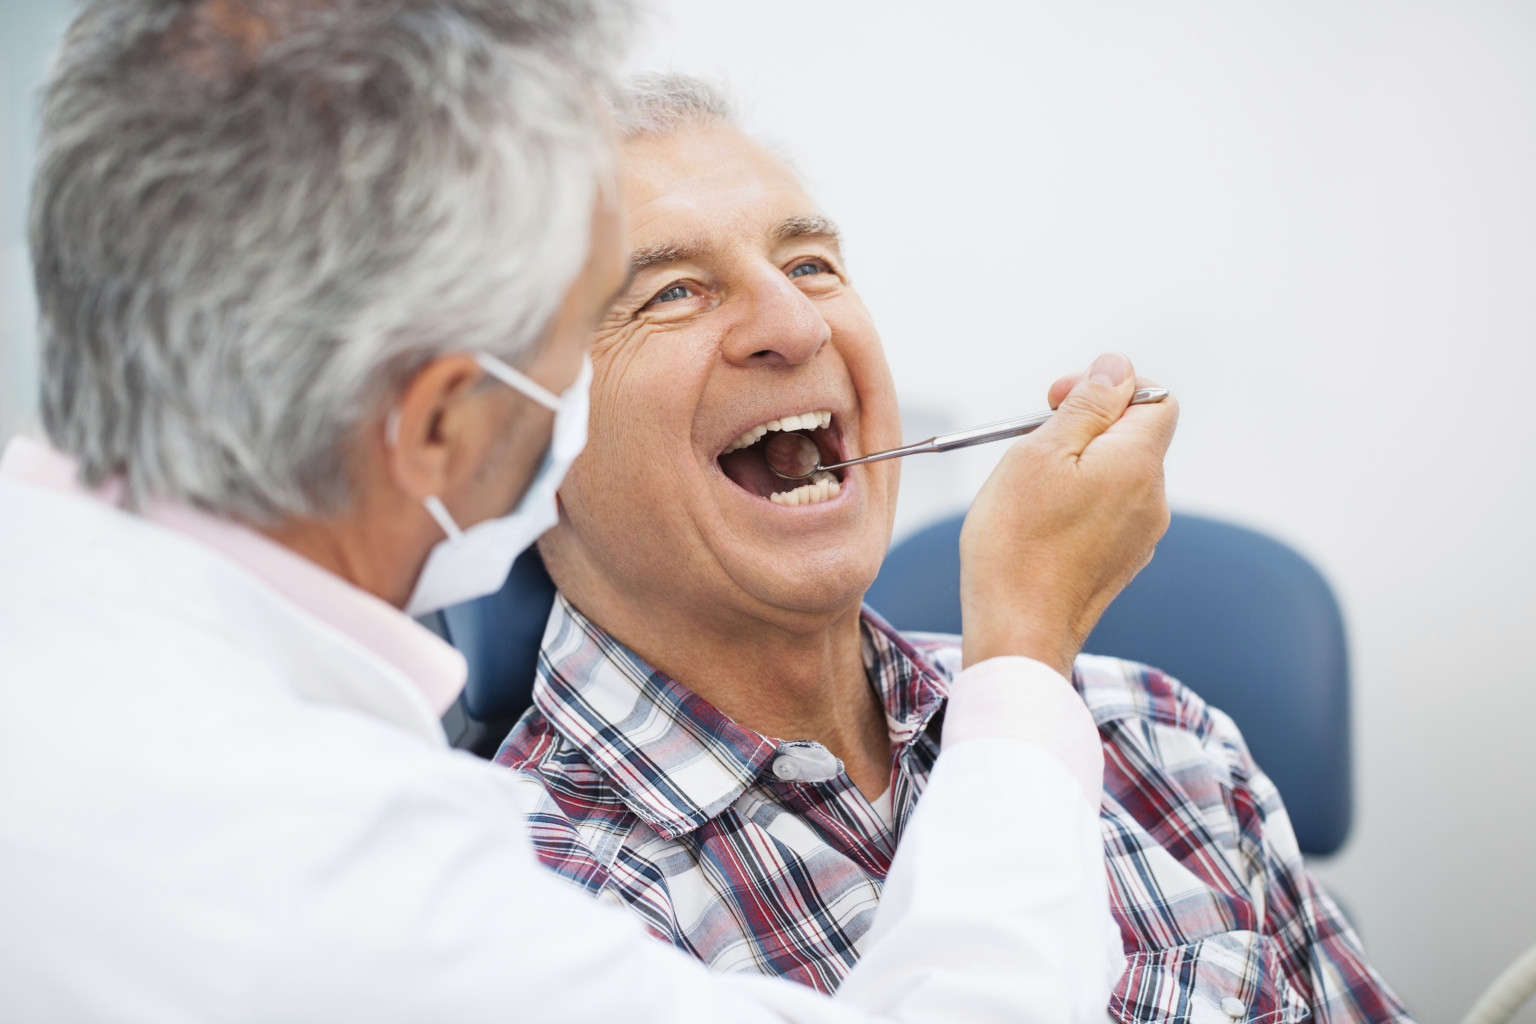 A Guide to Finding Affordable Dental Care | HuffPost
